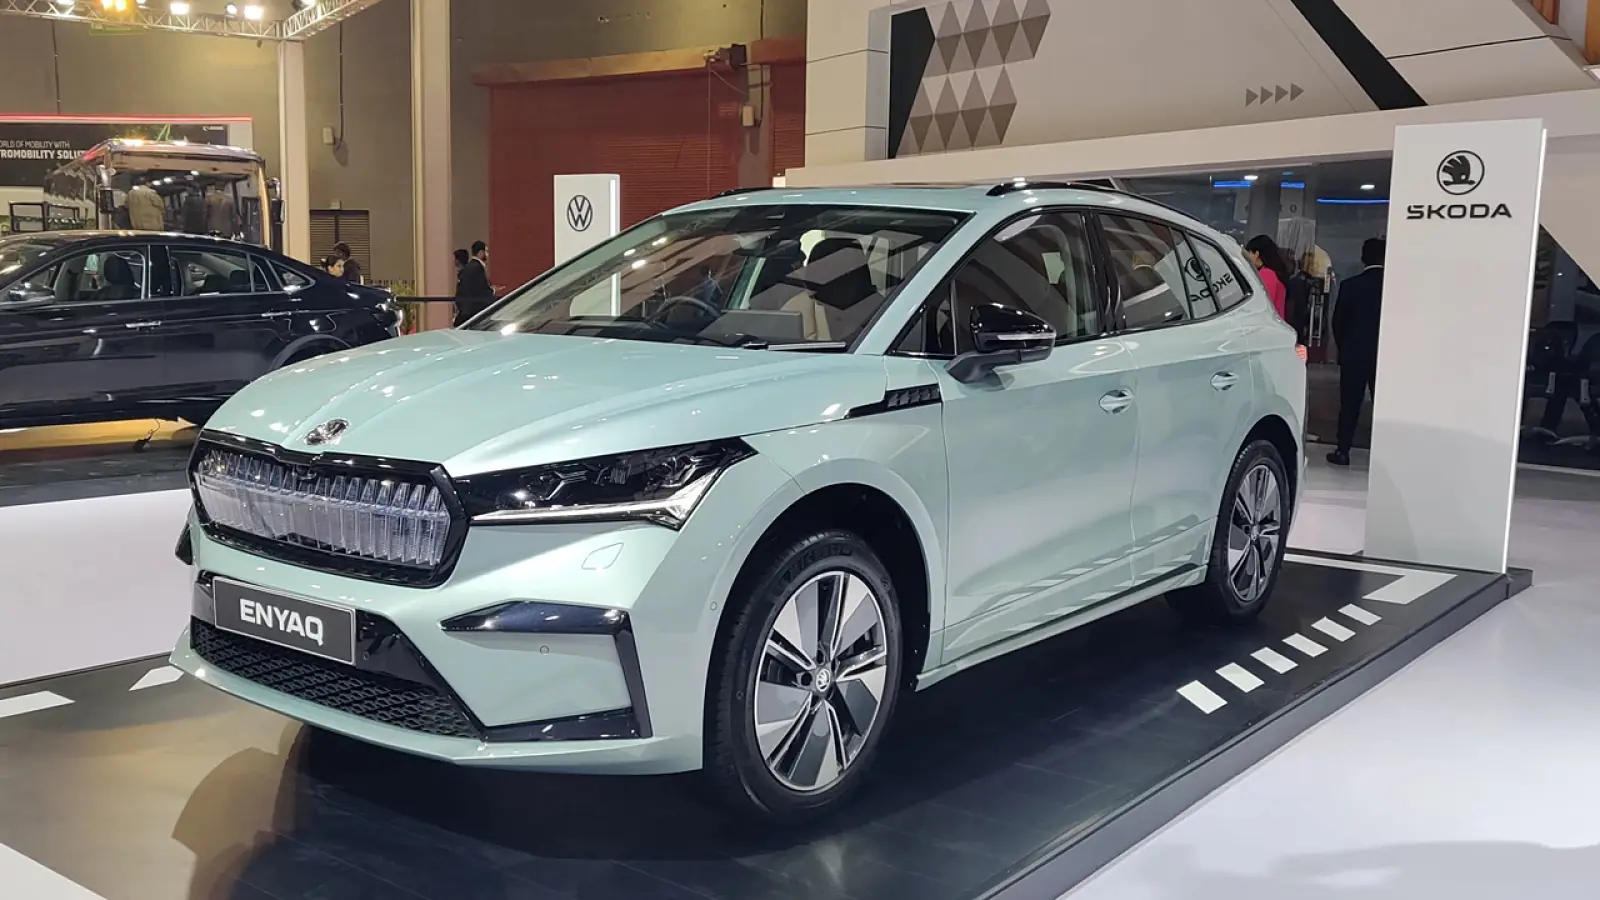 Skoda Enyaq EV will be launched in the Indian market today; Know the details of possible features, range and design